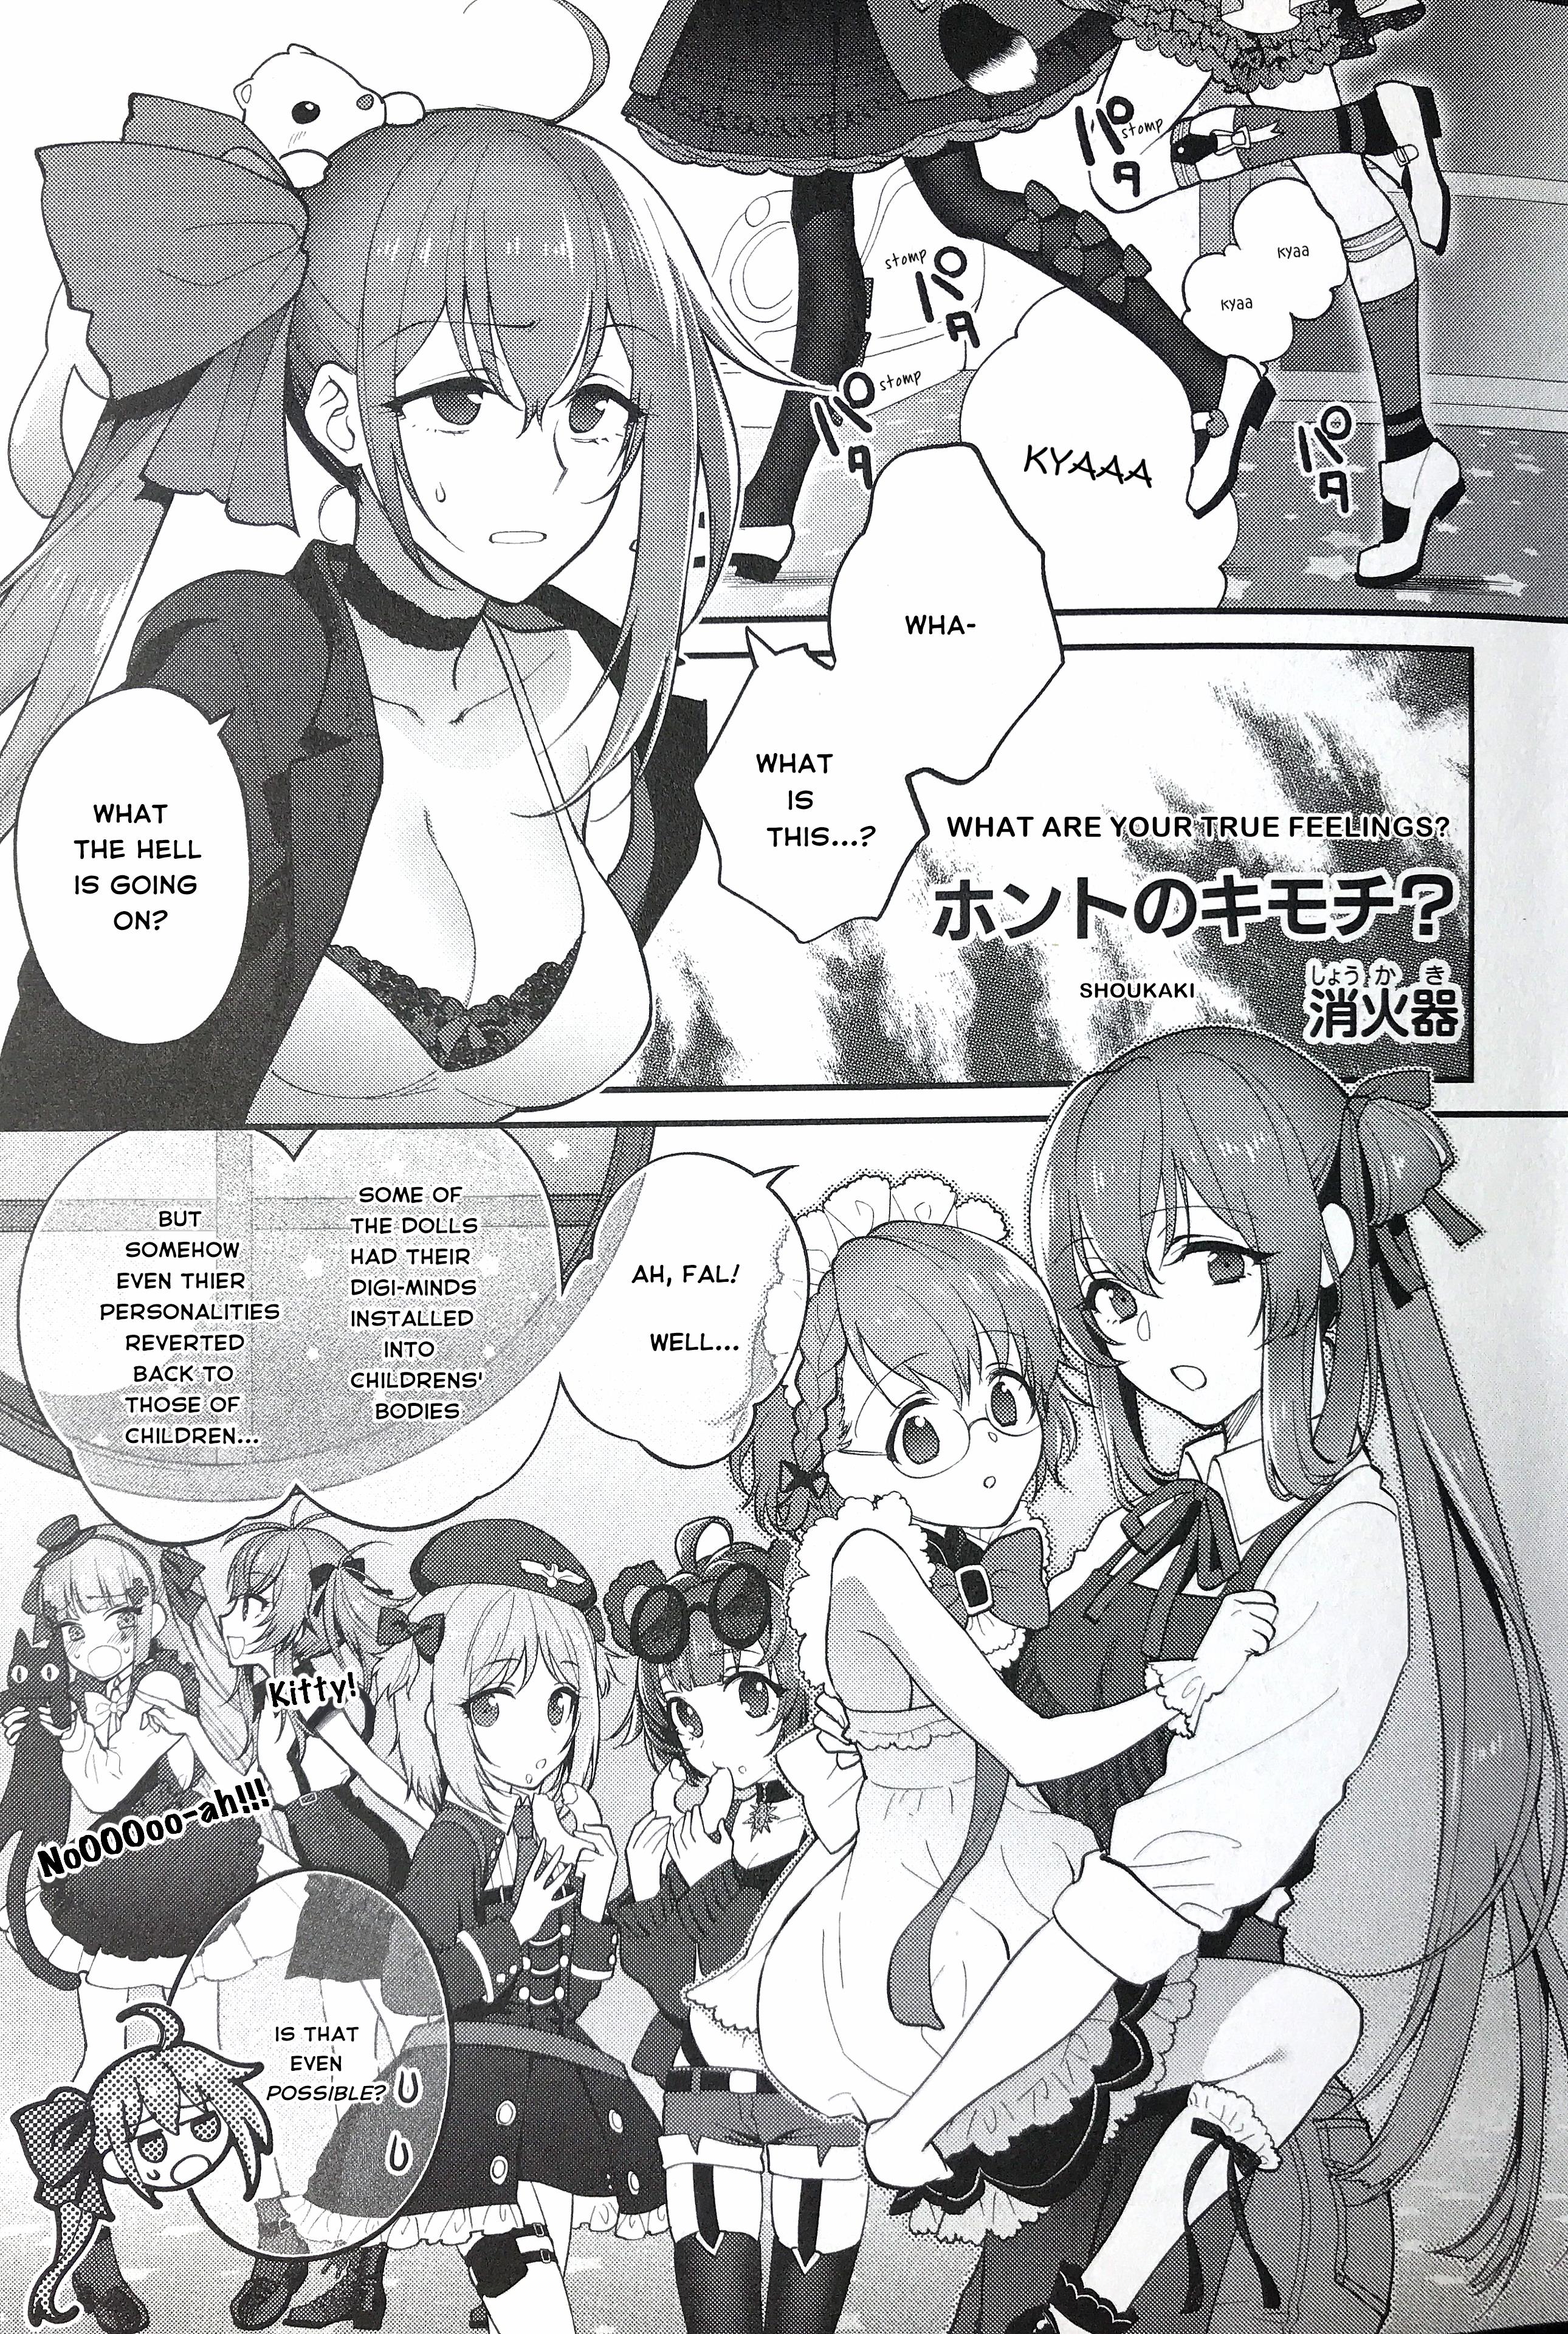 Dolls Frontline Comic Anthology - DNA Media 2019 - Chapter 33095 - What are Your True Feelings? - Image 1